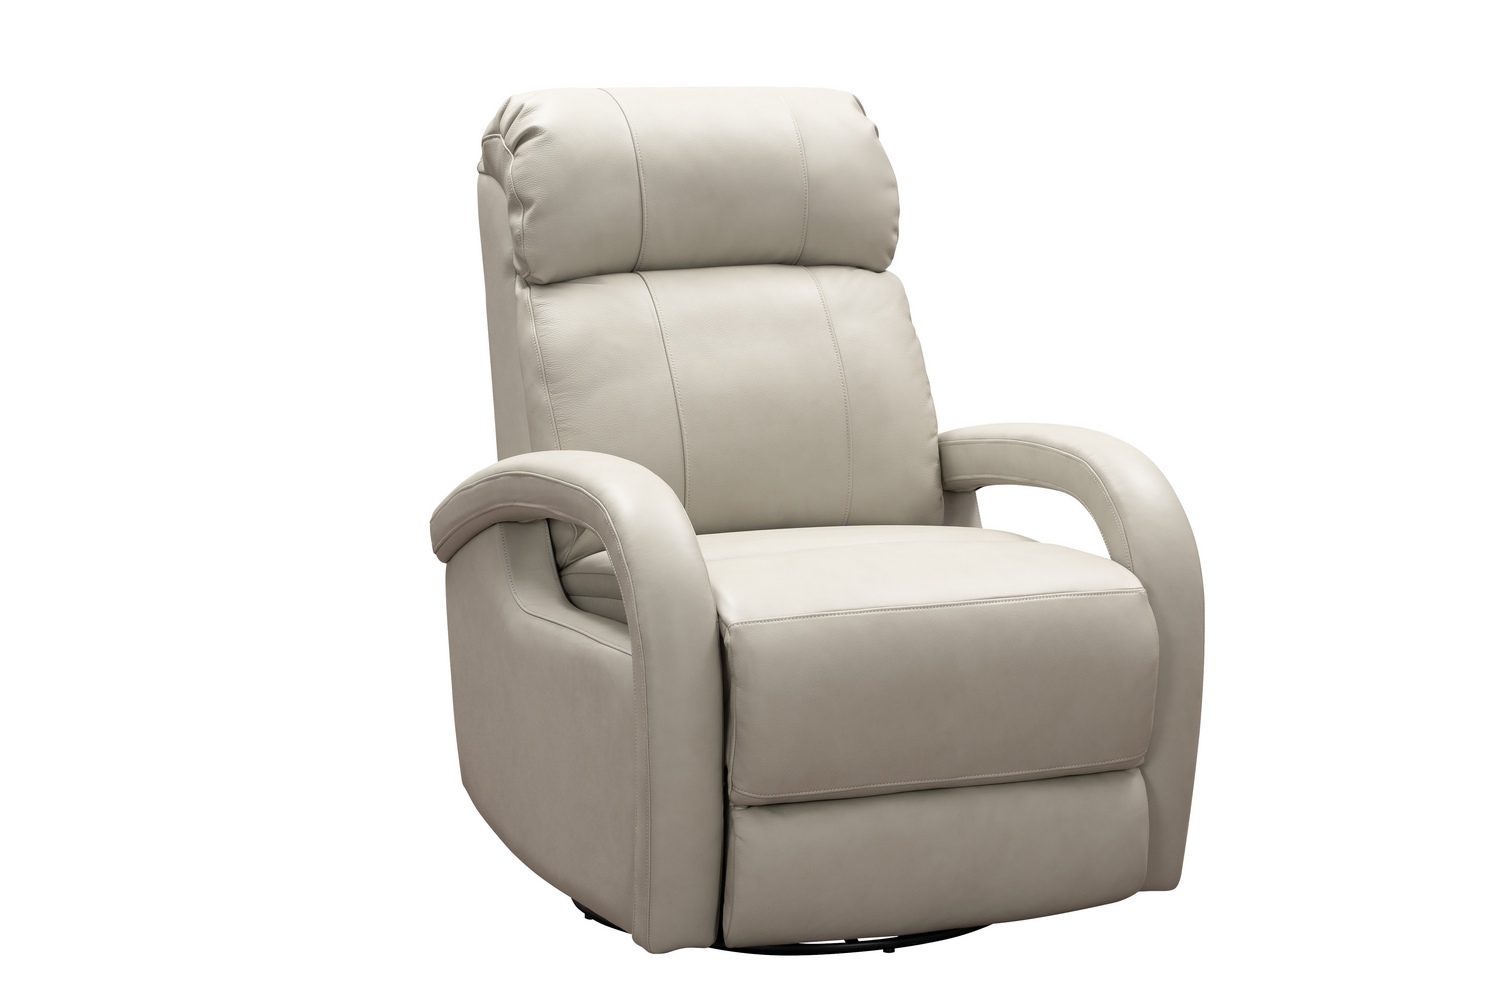 Barcalounger Harvey Swivel Glider Recliner Chair - Wenlock Dove/All Leather